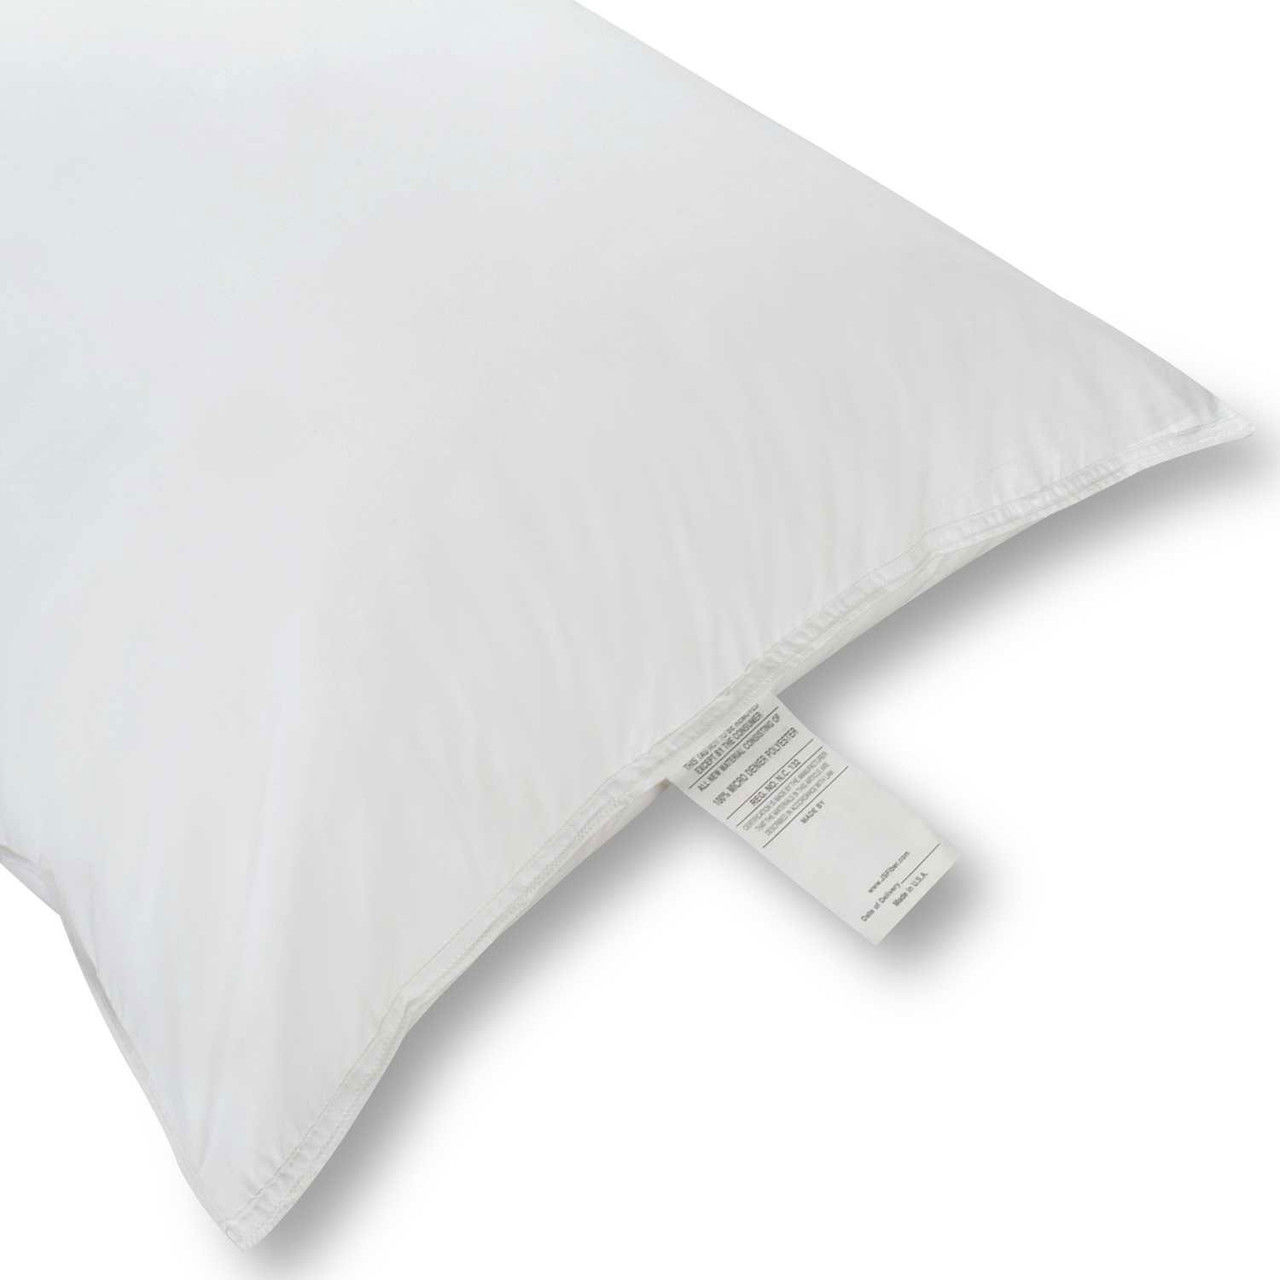 What are the available sizes for the Synthetic Ultra Down Pillow?